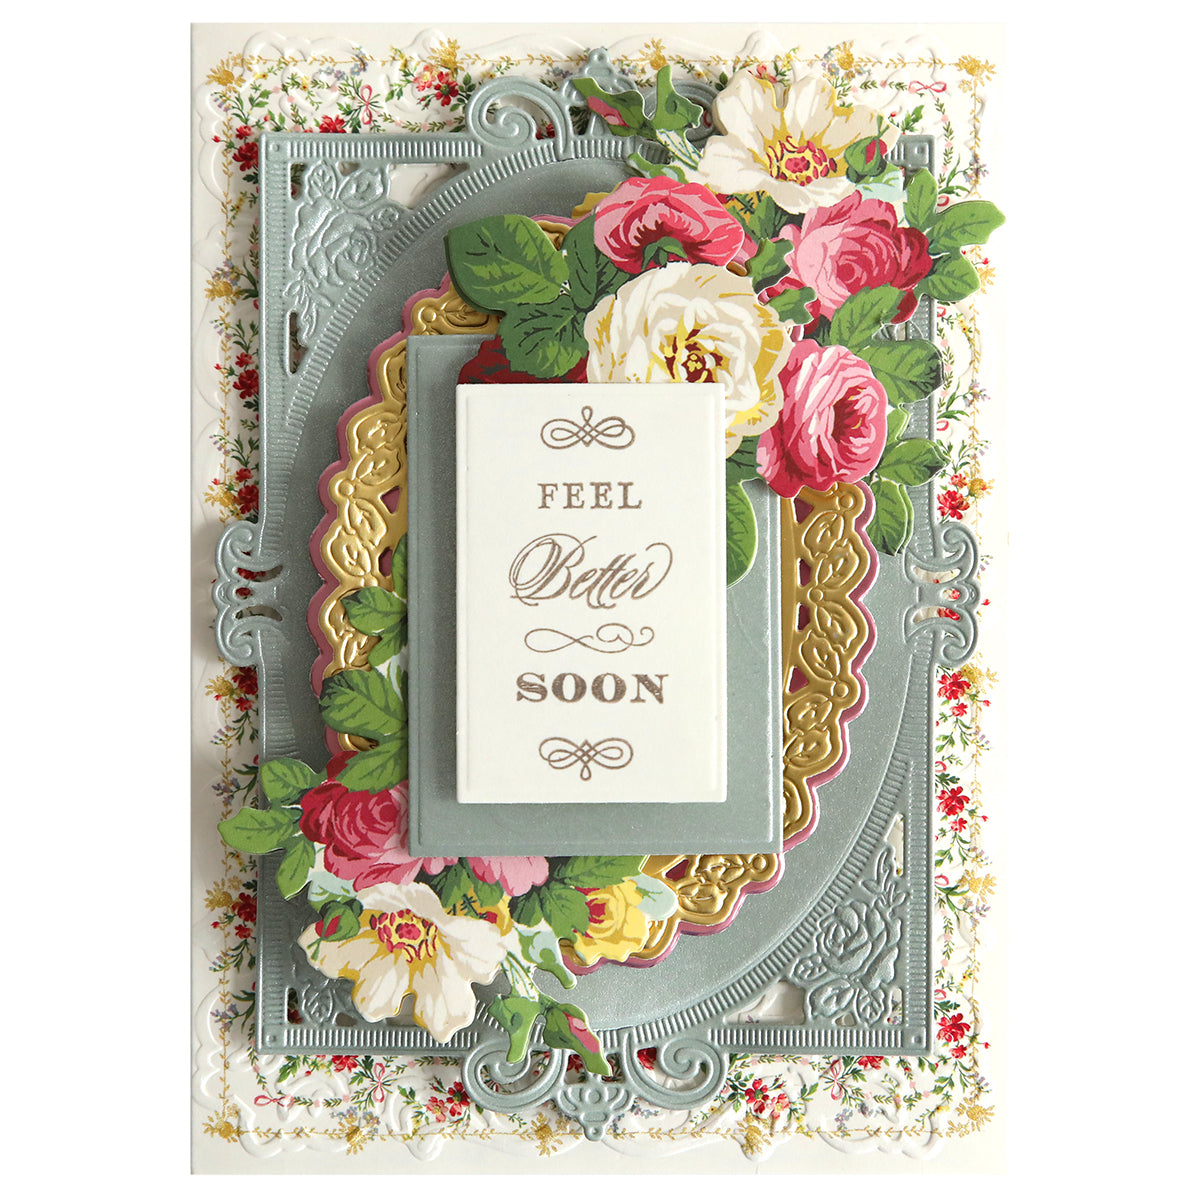 A decorative "feel better soon" greeting card embellished with colorful floral patterns and ornate golden borders on an embossed, textured background, featuring Fantastic Sentiment Stamps and Dies to create your own sentiments.